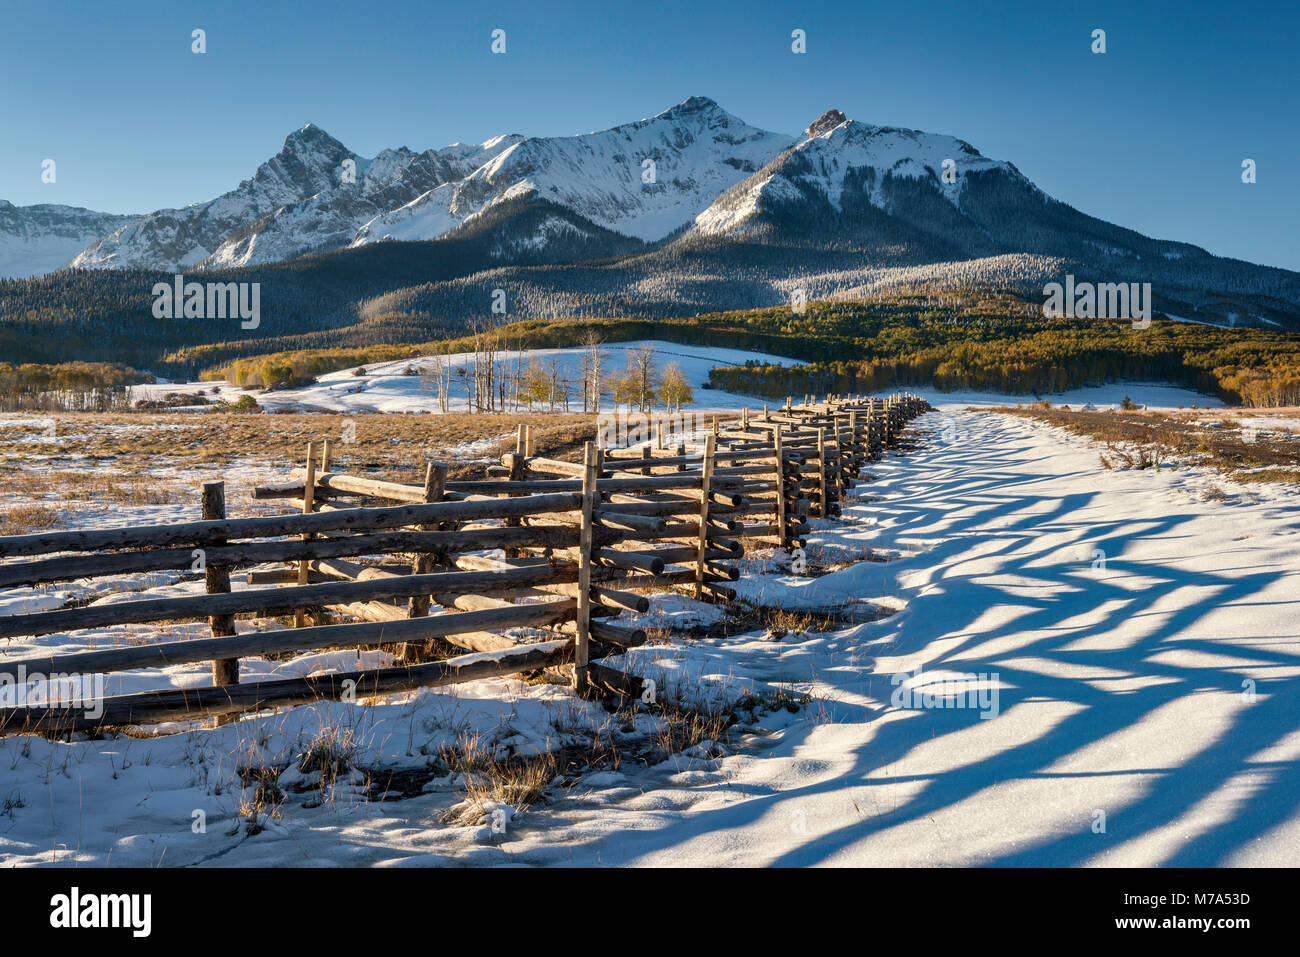 North Pole Peak and Hayden Peak, Sneffels Range, zigzag fence, snow in late fall, at sunrise from Last Dollar Road, San Juan Mountains, Colorado, USA Stock Photo